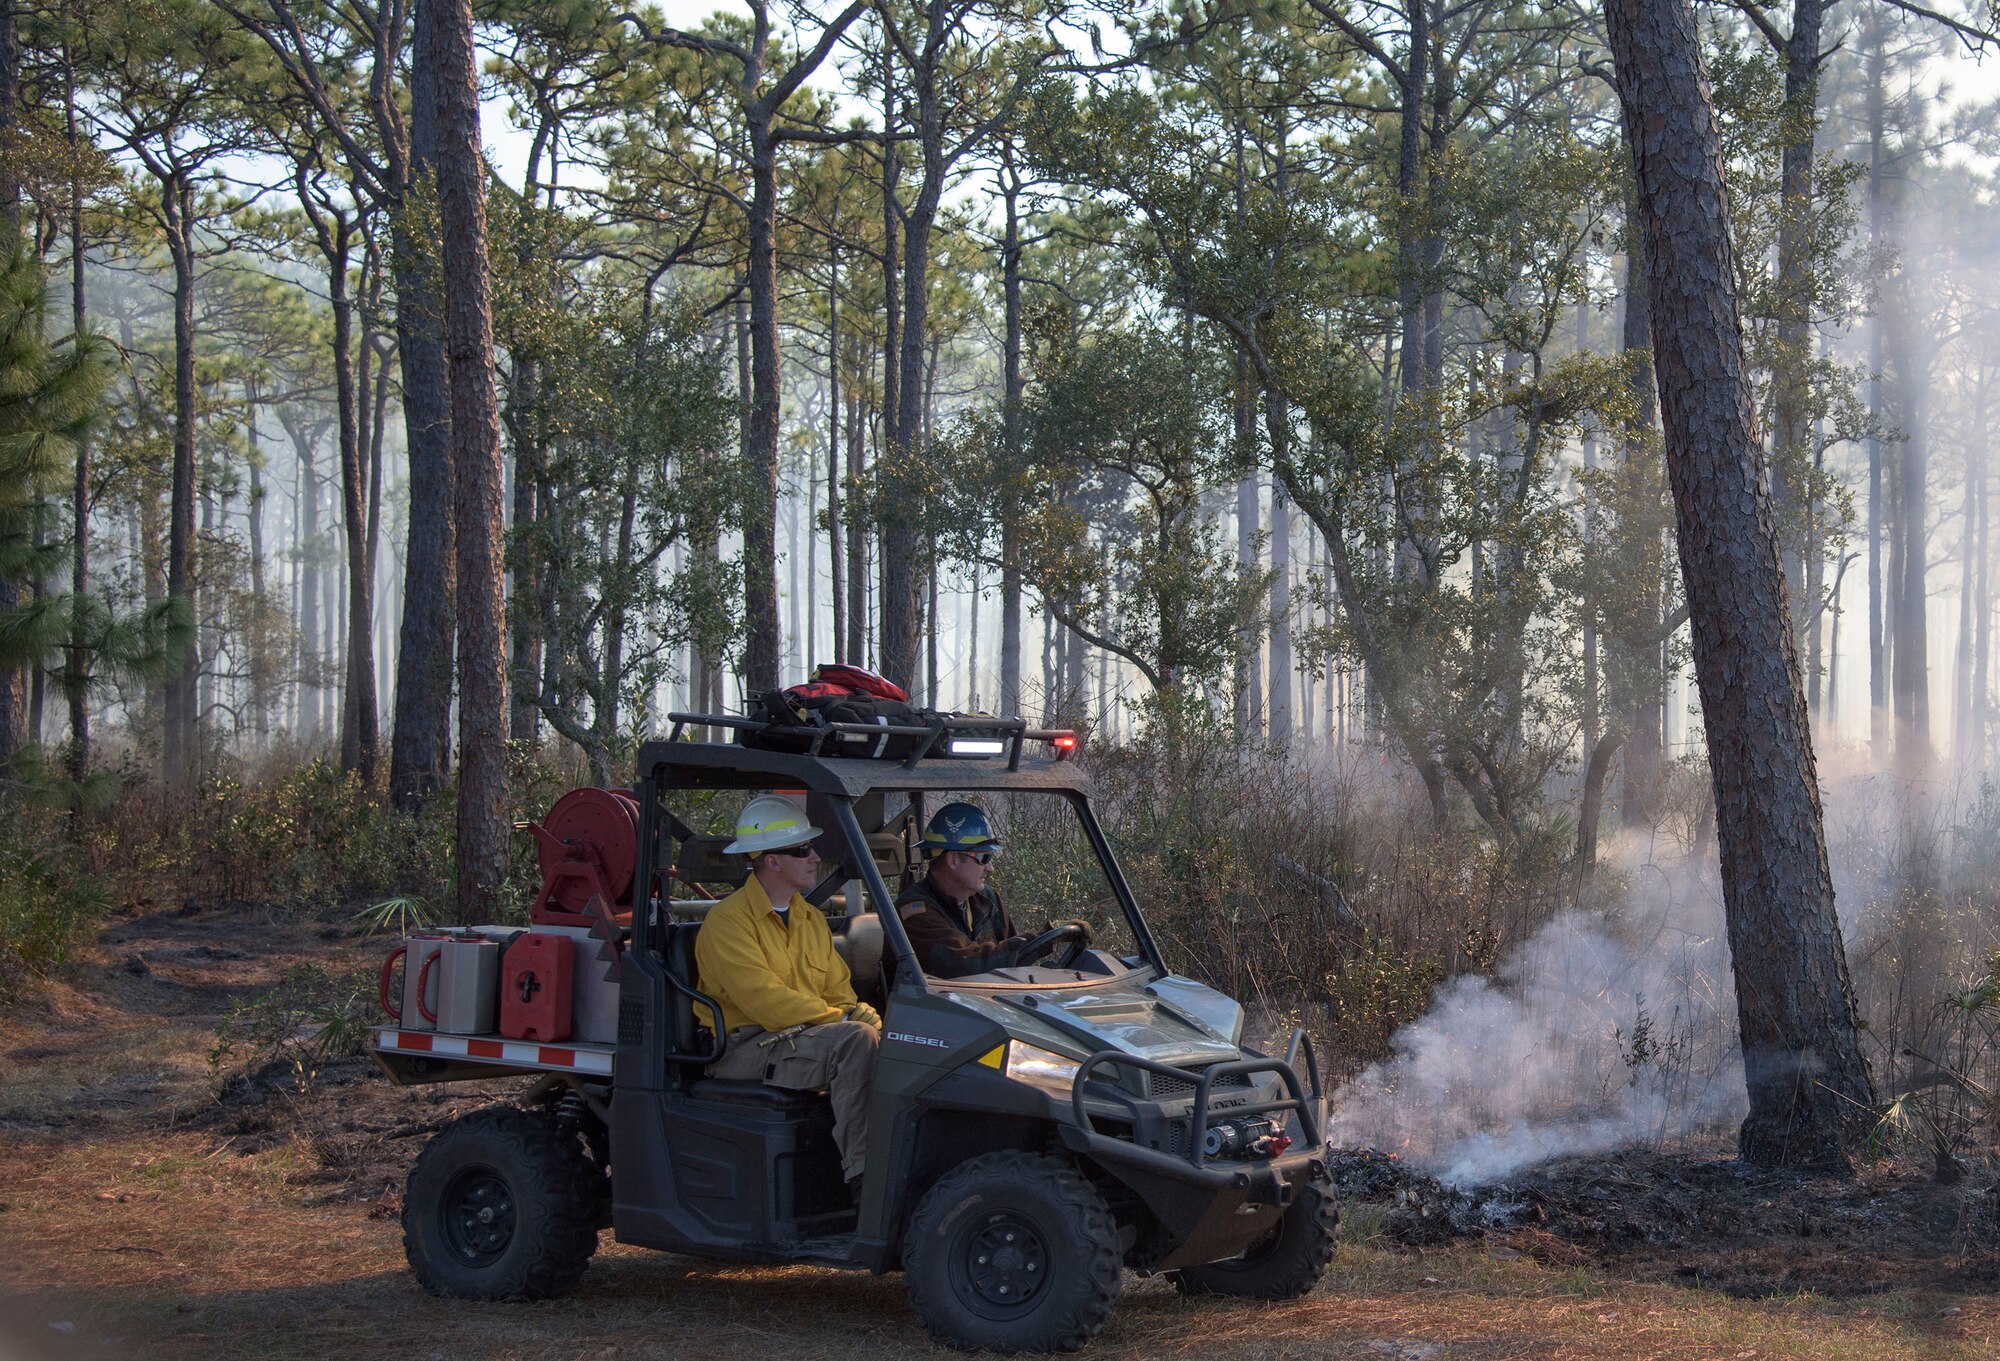 Air Force Civil Engineer Center wildland fire managers conduct a prescribed burn at White Point Recreation Area on the Eglin reservation in Florida. Prescribed fires maintain the base's ecosystem in its pristine state, reduce dangerous buildup of understory and enable maximum flexibility to conduct test and training missions without causing catastrophic wildfires.The Fire Management division here applies prescribed fire to an average of 90,000 acres annually.